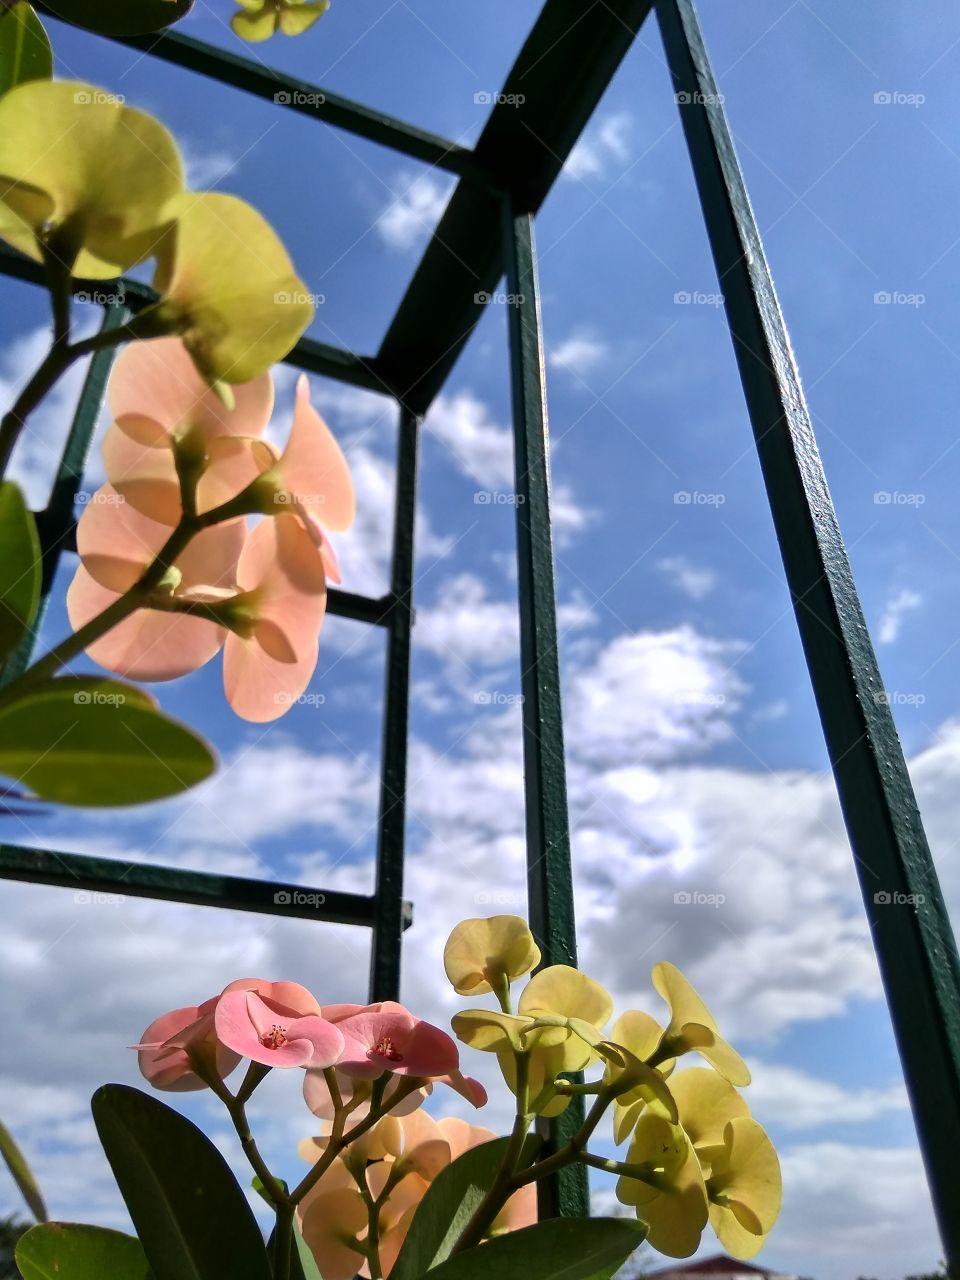 Colorful flowers and Sky. The view of it gives me a very good day. The weather is good too. It's a bit windy but I managed to take these photos.